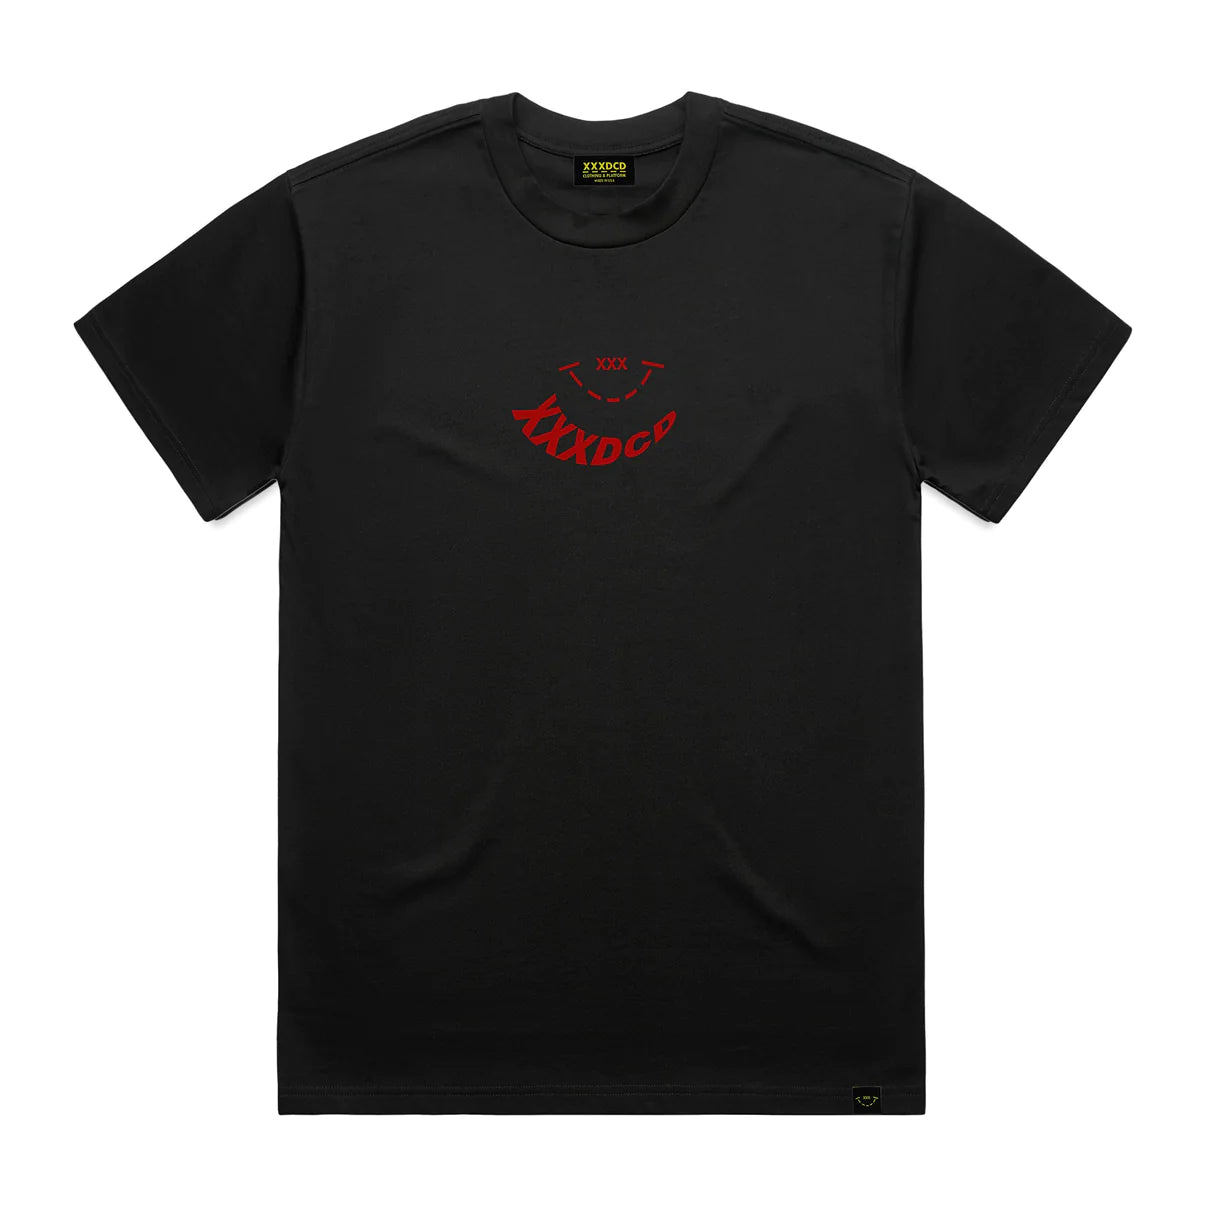 AFTERS T-SHIRT(BLACK)